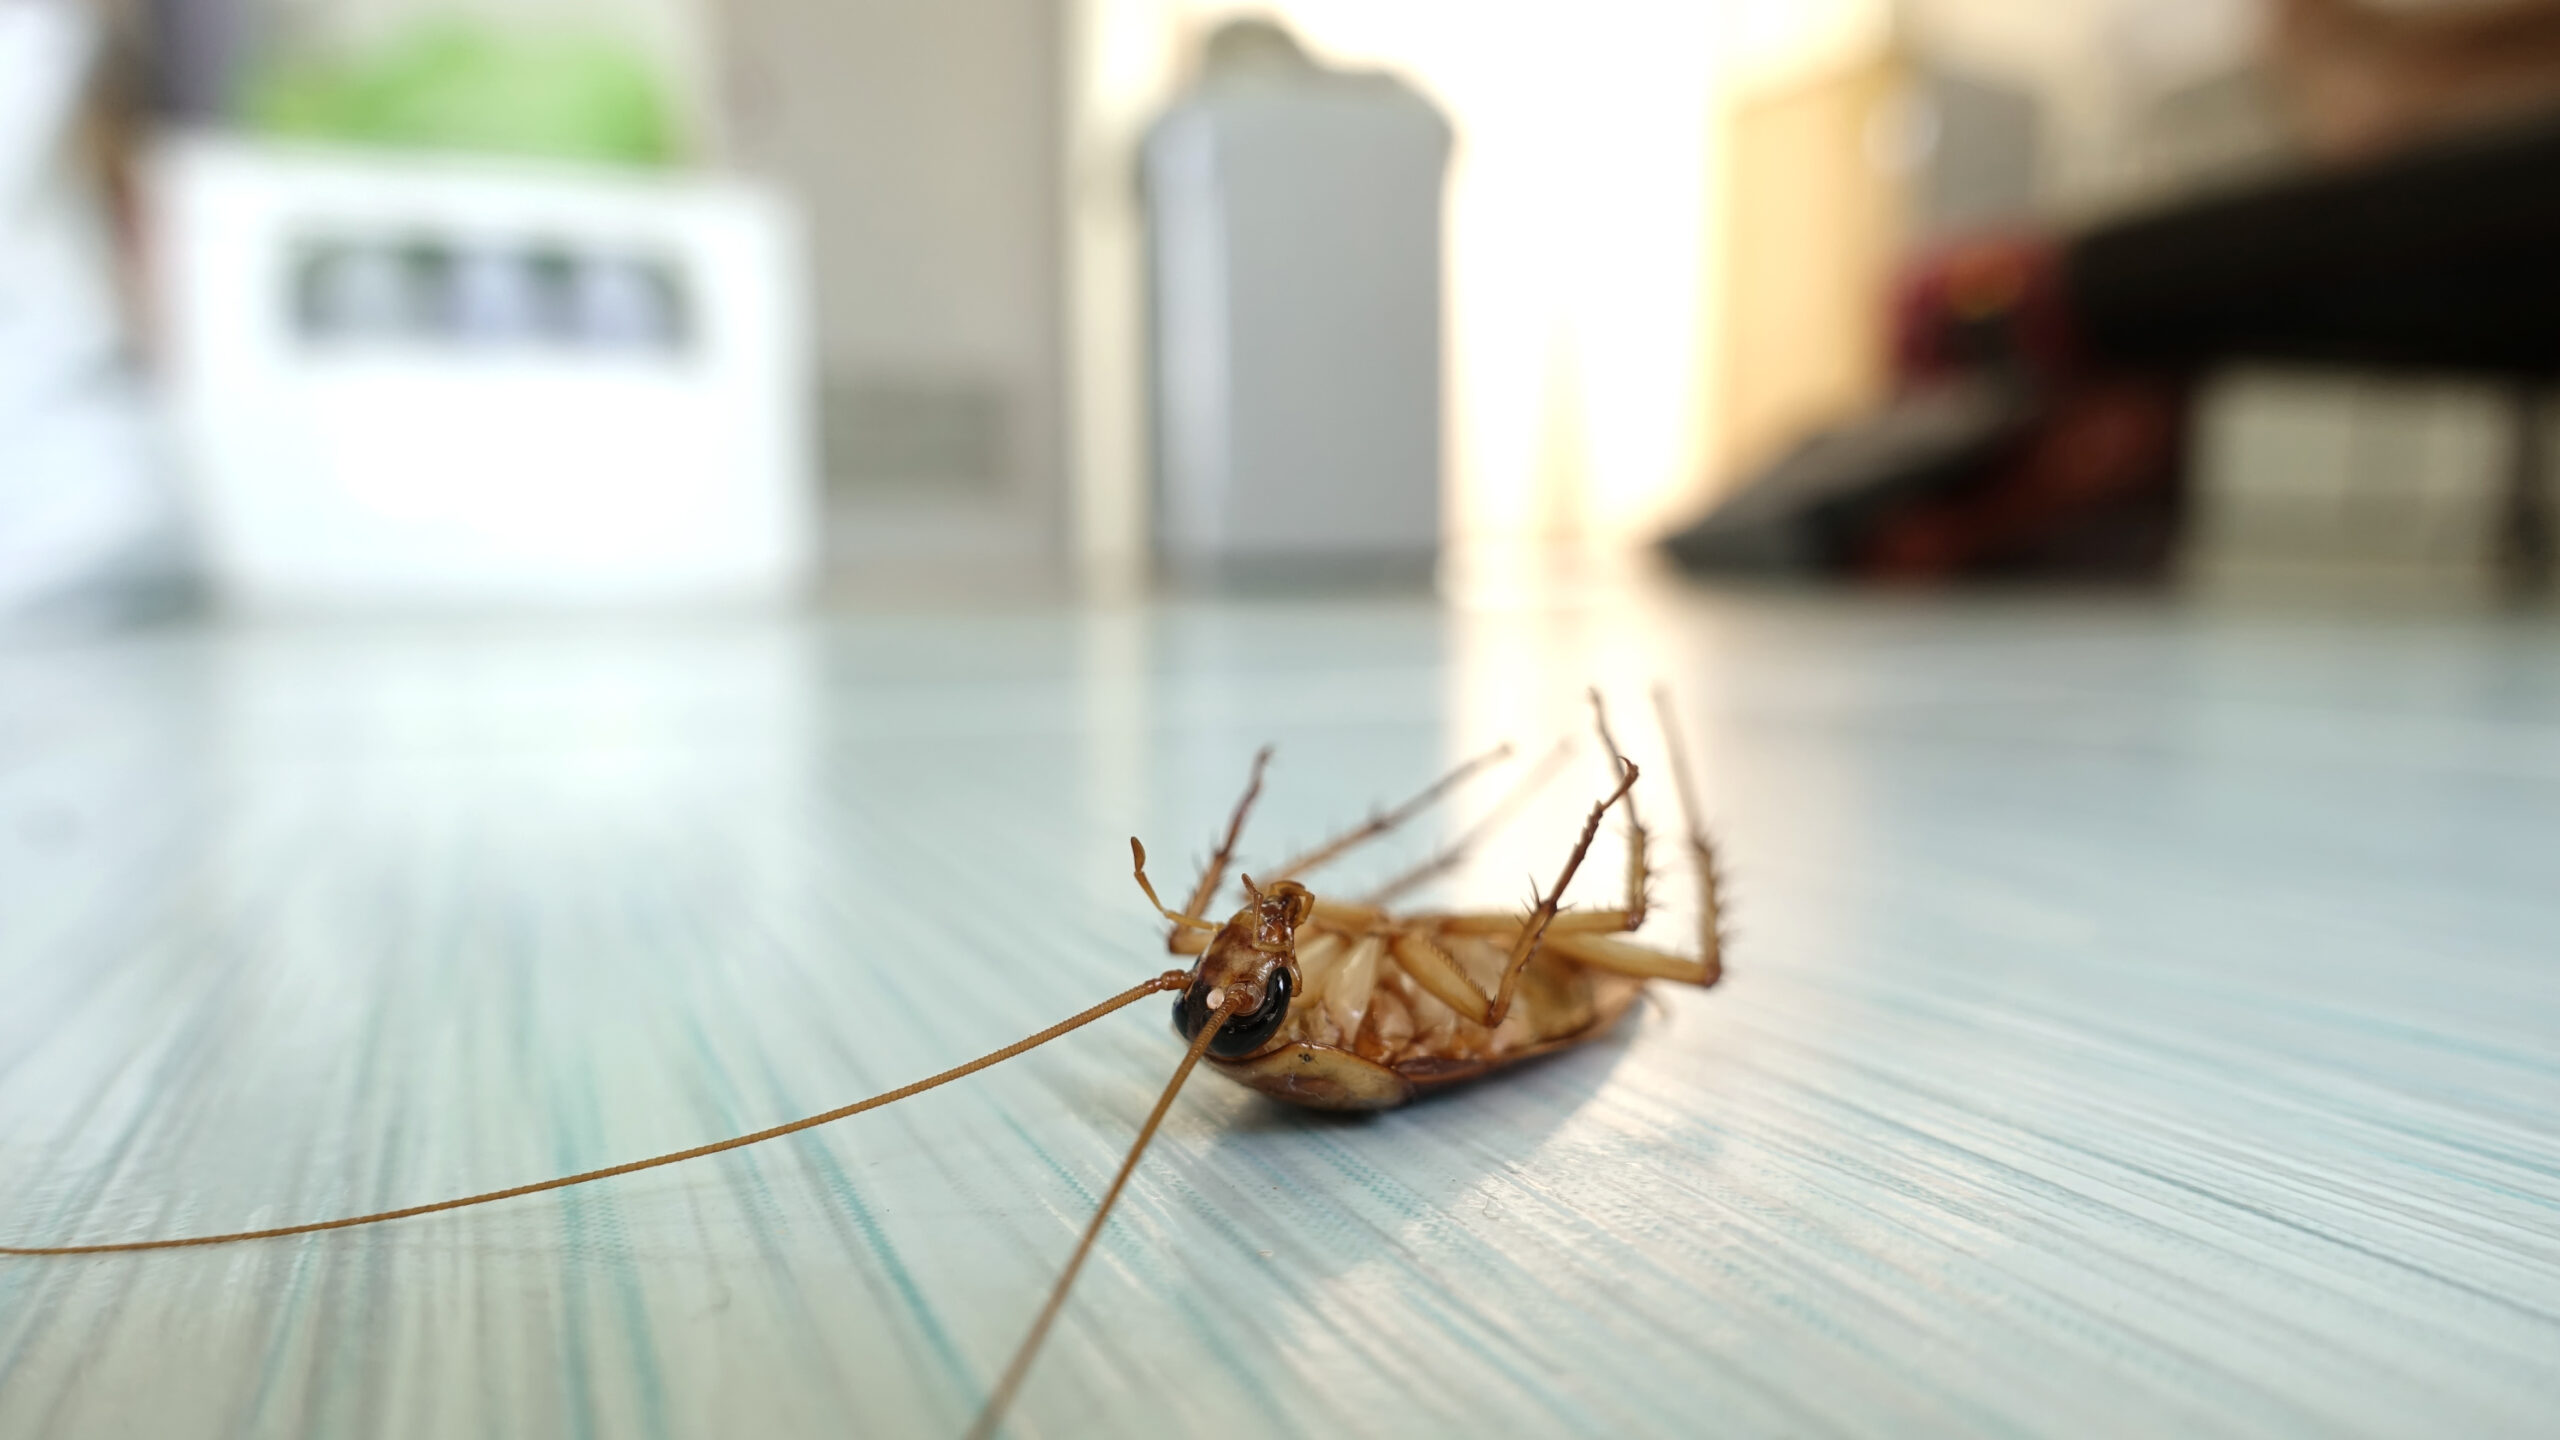 Dead cockroach on the floor after being hit by pesticides